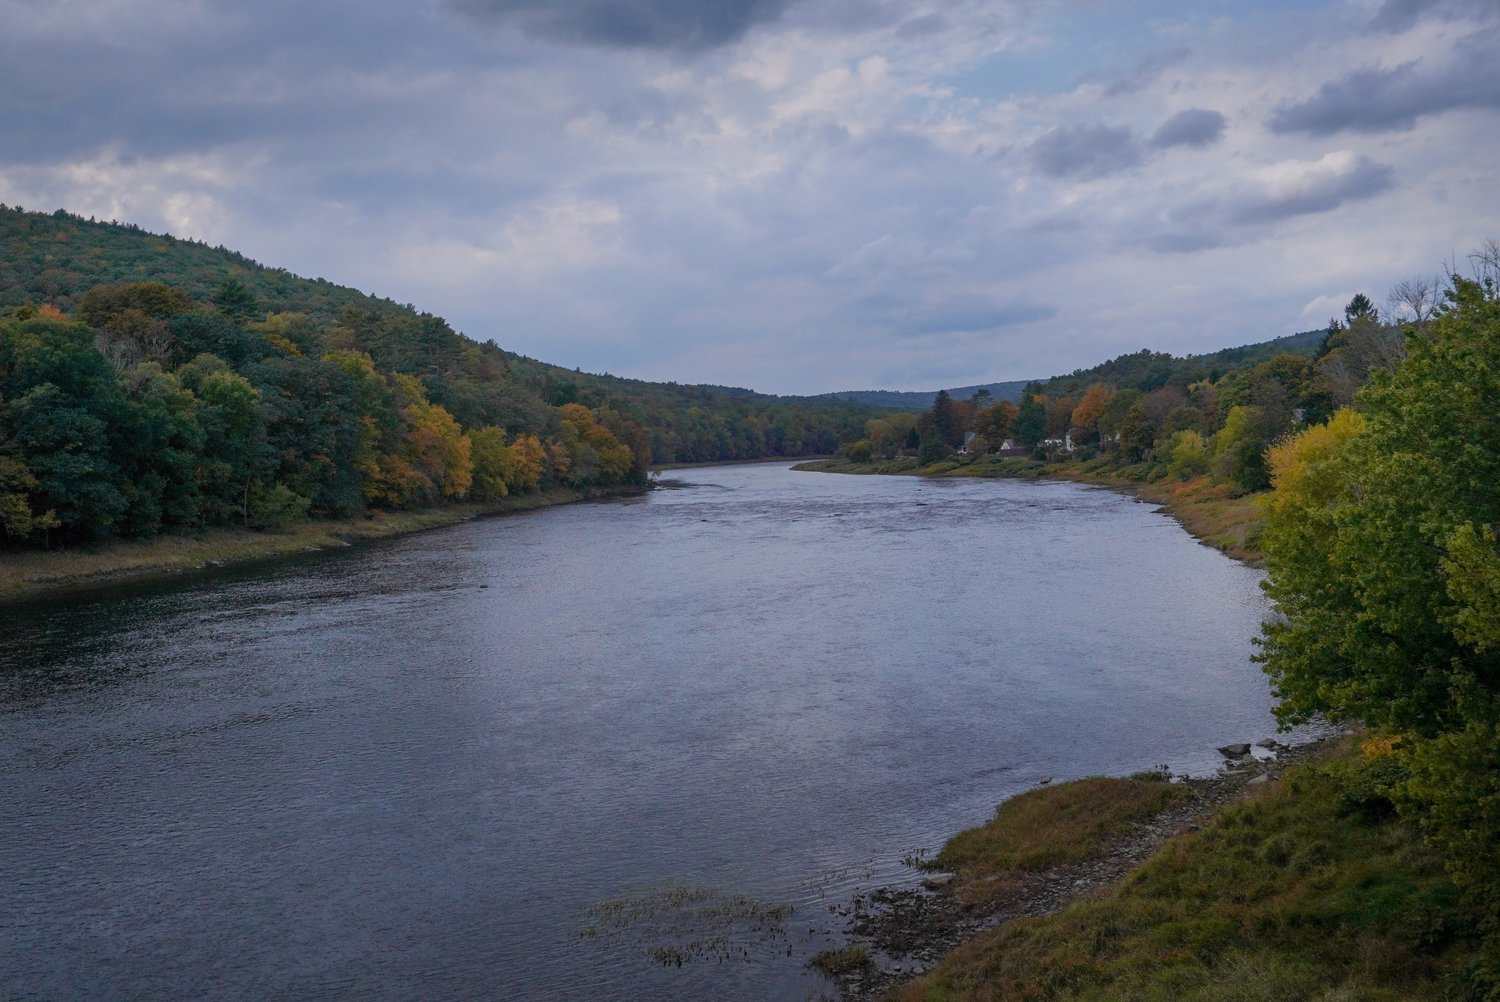 The upper portion of the Delaware River is a designated scenic river, because of its natural beauty.